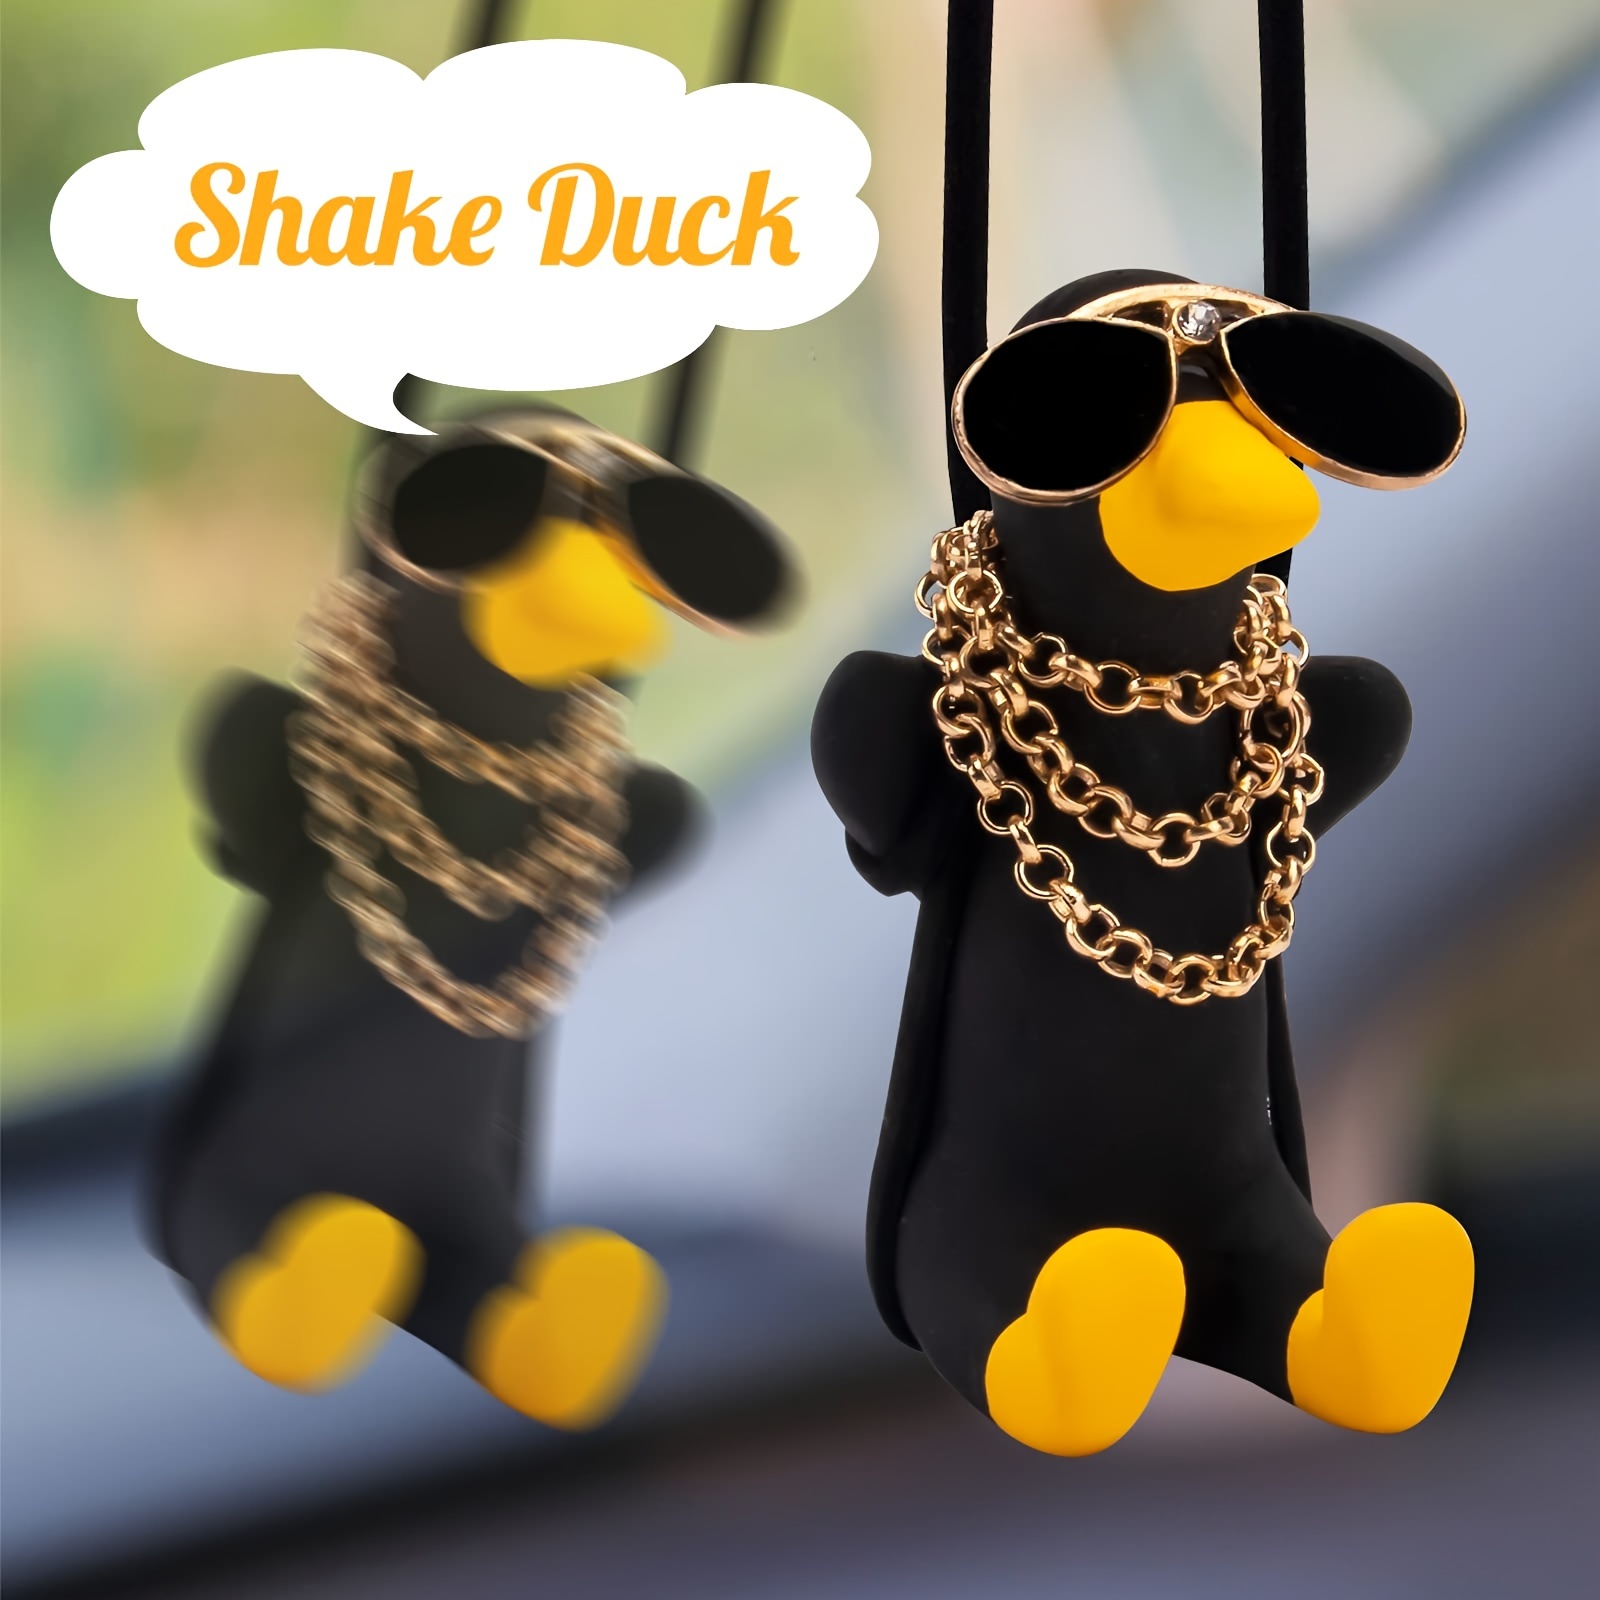 Funny Swinging Duck, Cool Car Accessories for Gifts, Hanging Duck Ornament  